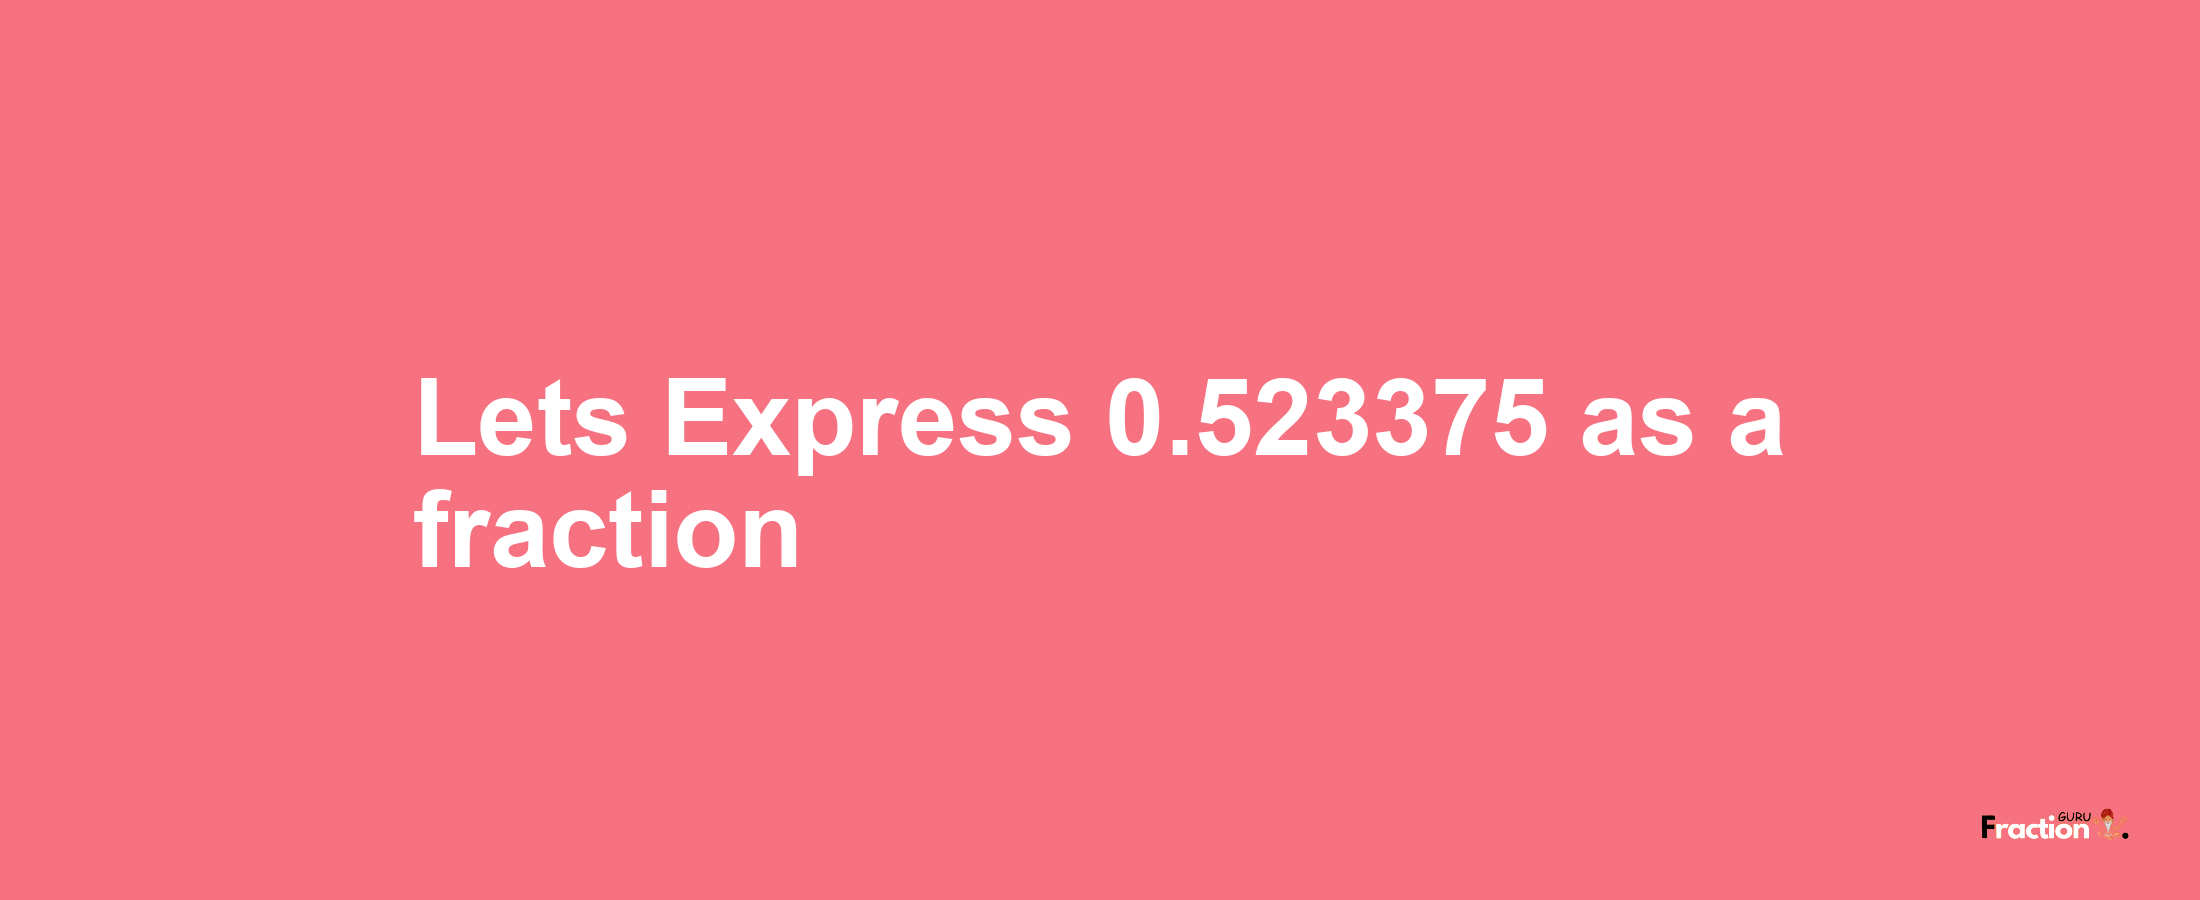 Lets Express 0.523375 as afraction